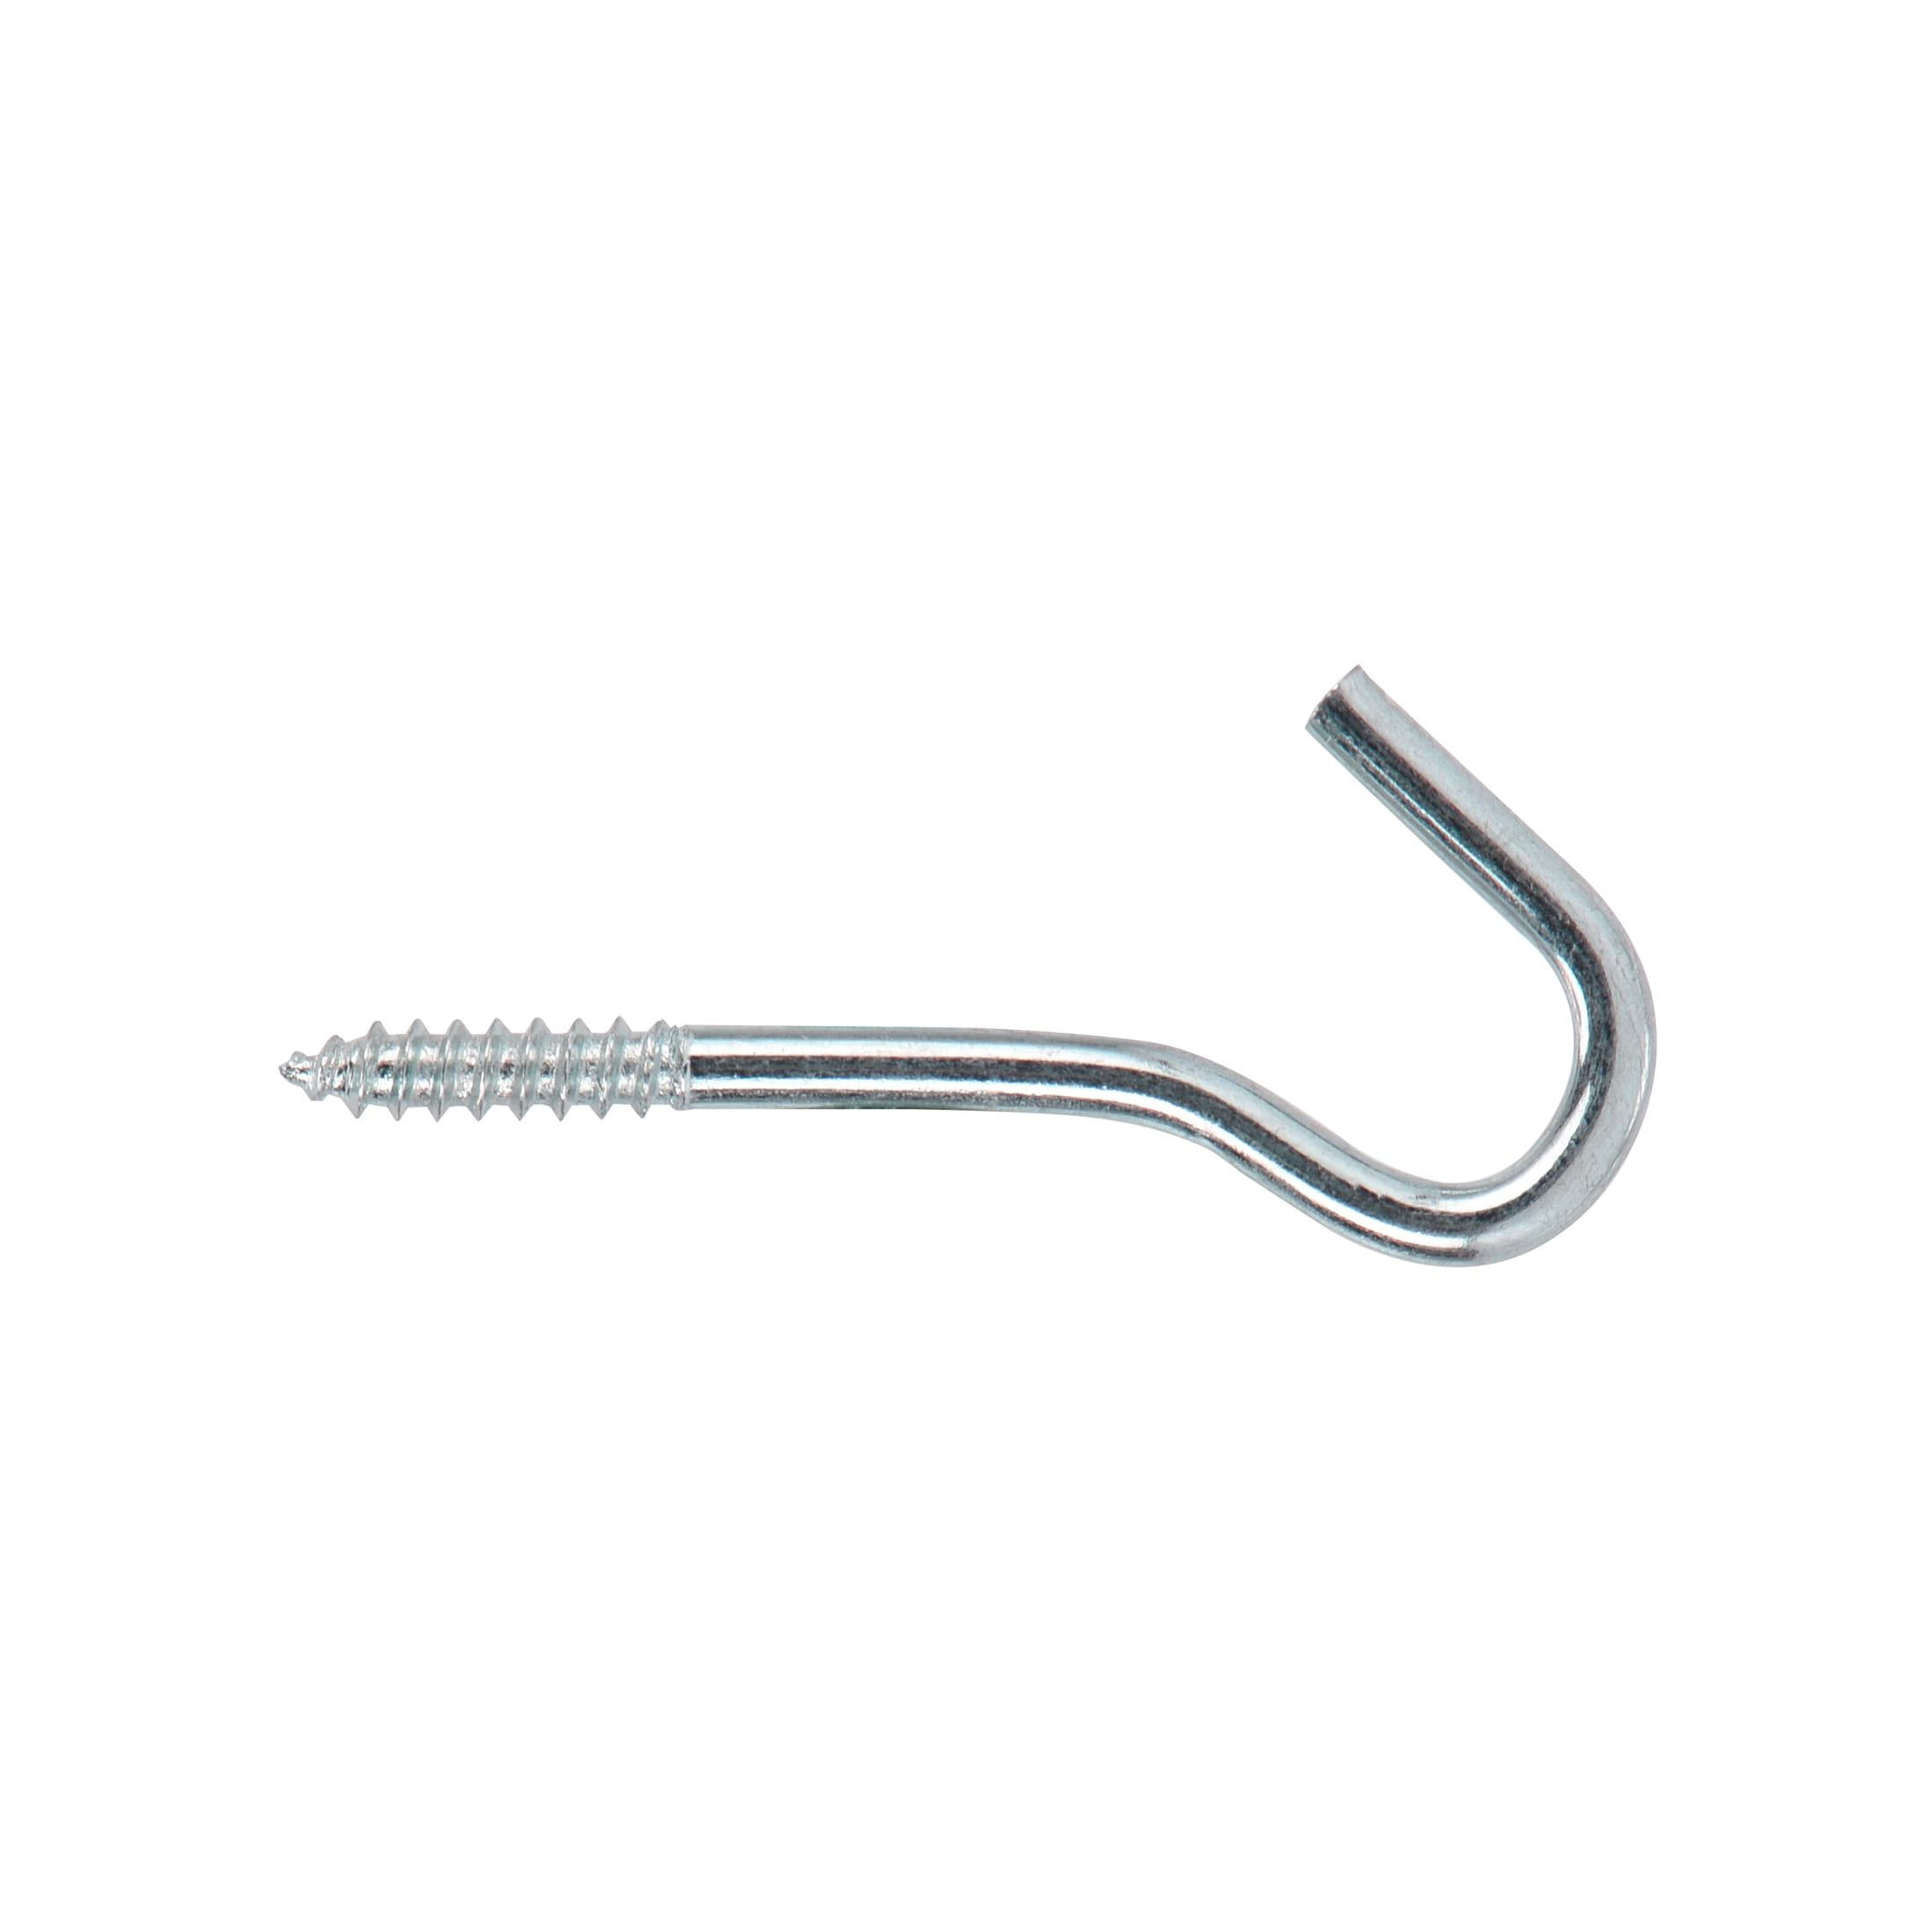 50-Pack of Zinc-Plated Screw Hooks 40mm (1-5/8in) Size – Strong